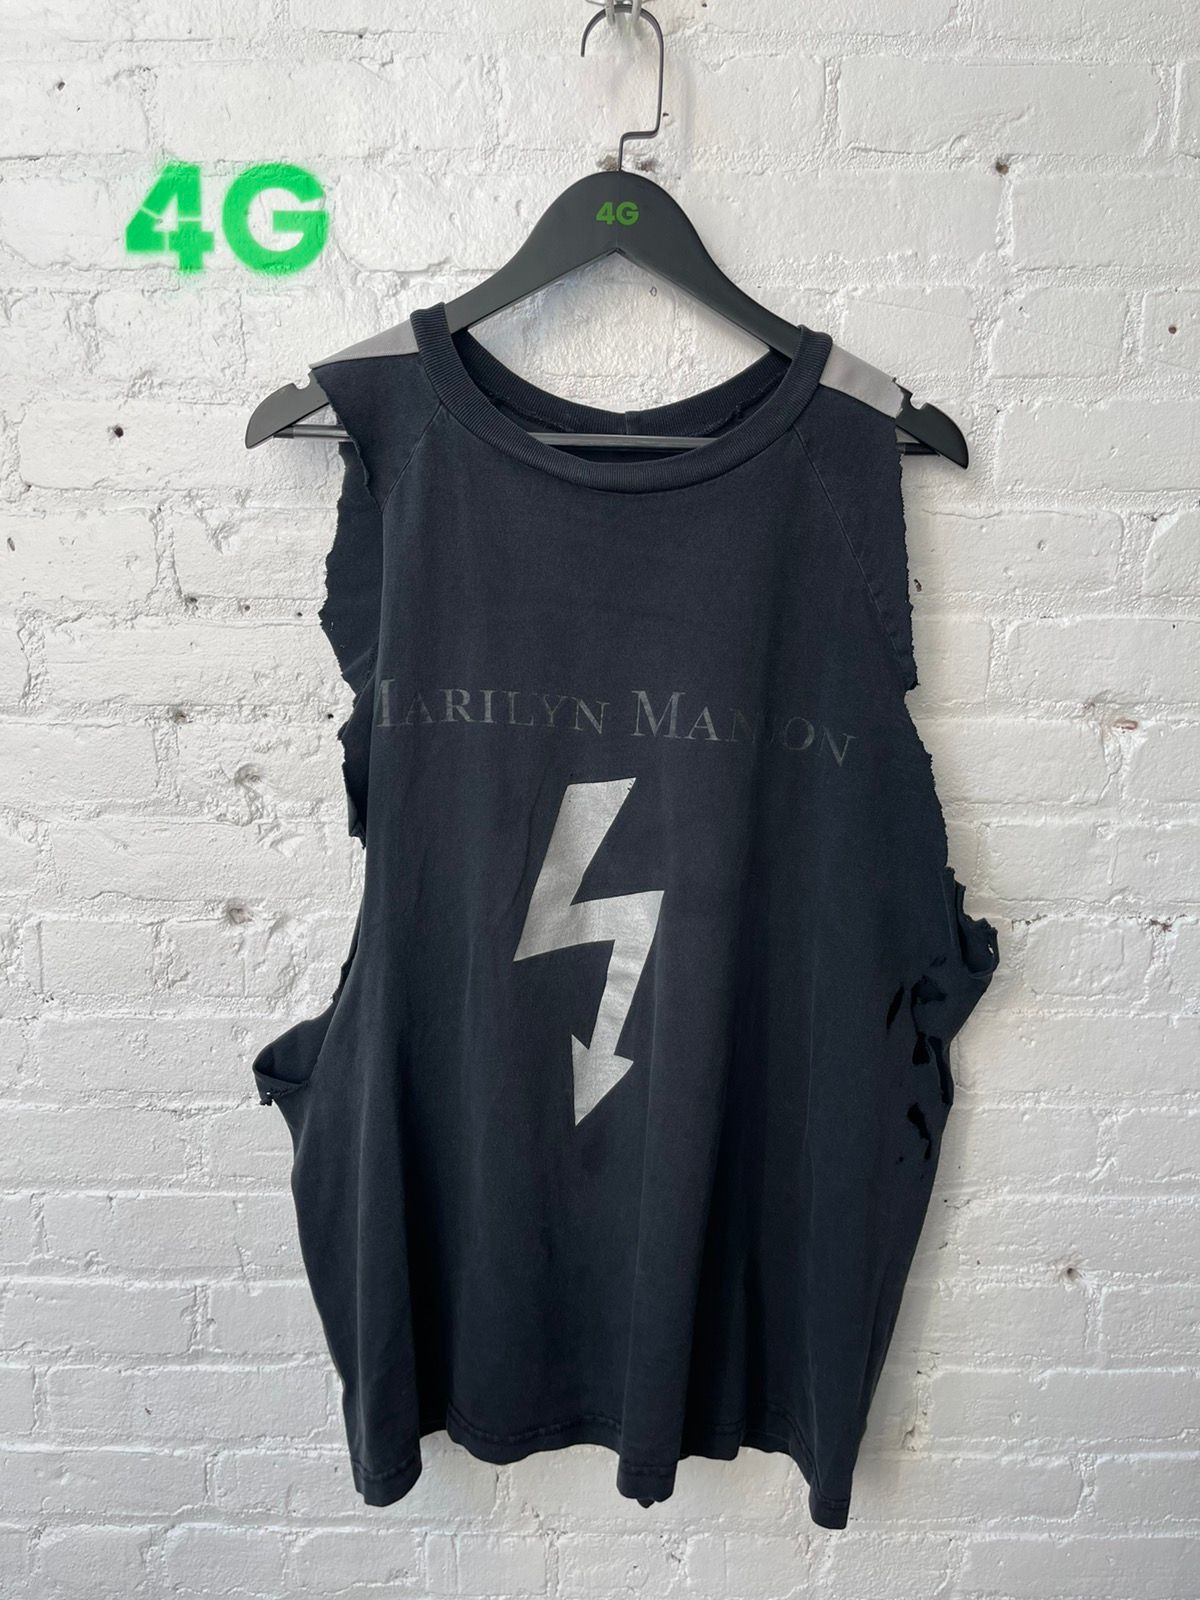 Pre-owned Marilyn Manson X Vintage 90's Thrashed Marilyn Manson Tank Top Shirt 4gseller In Black